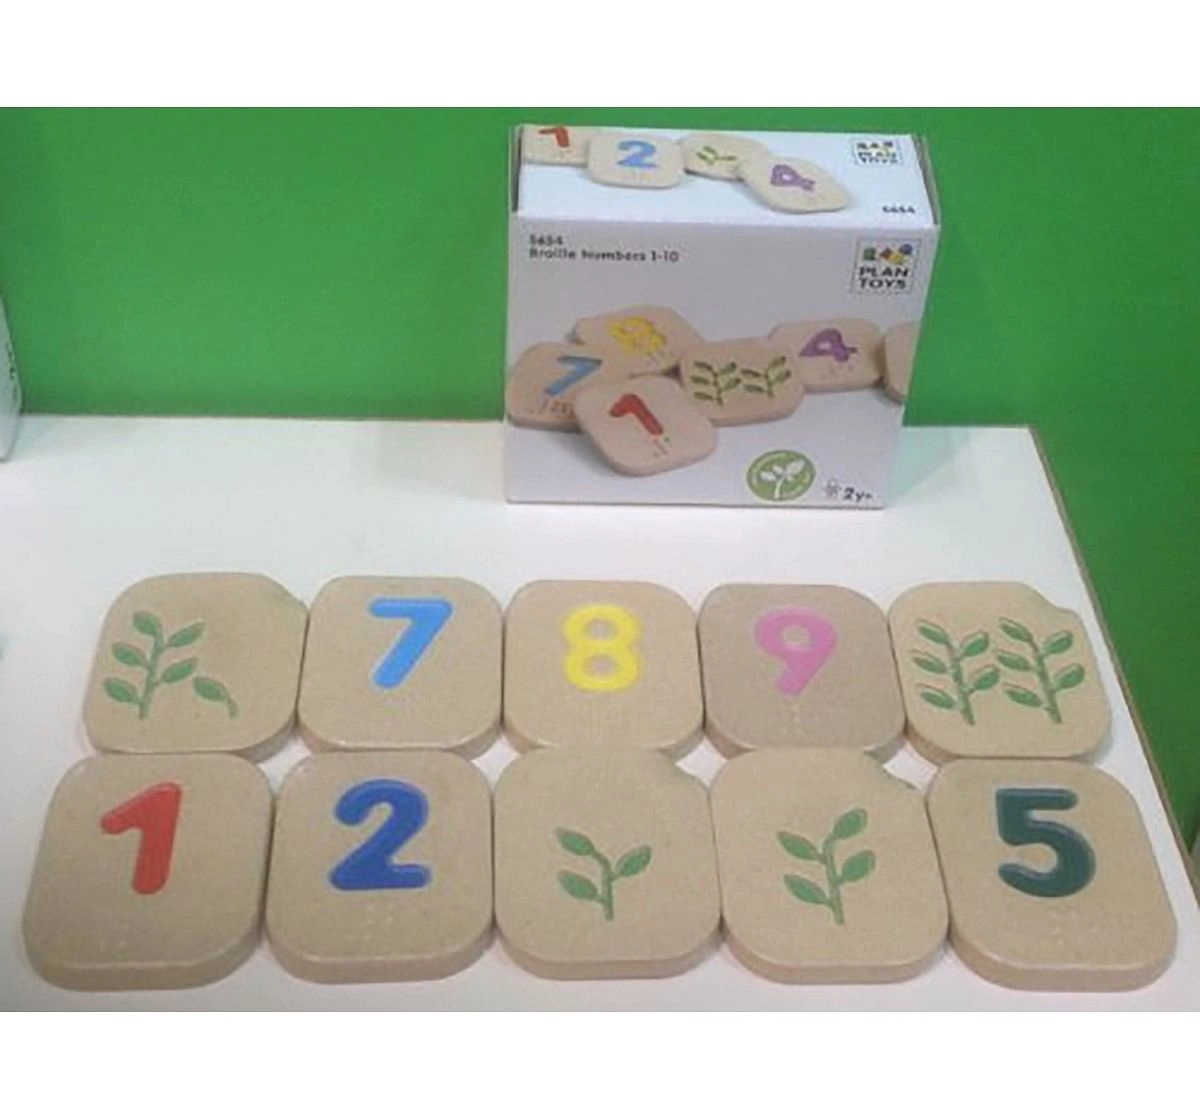 Plan Toys-Braille Numbers 1 - 10  Wooden Toys for Kids age 3Y+ 